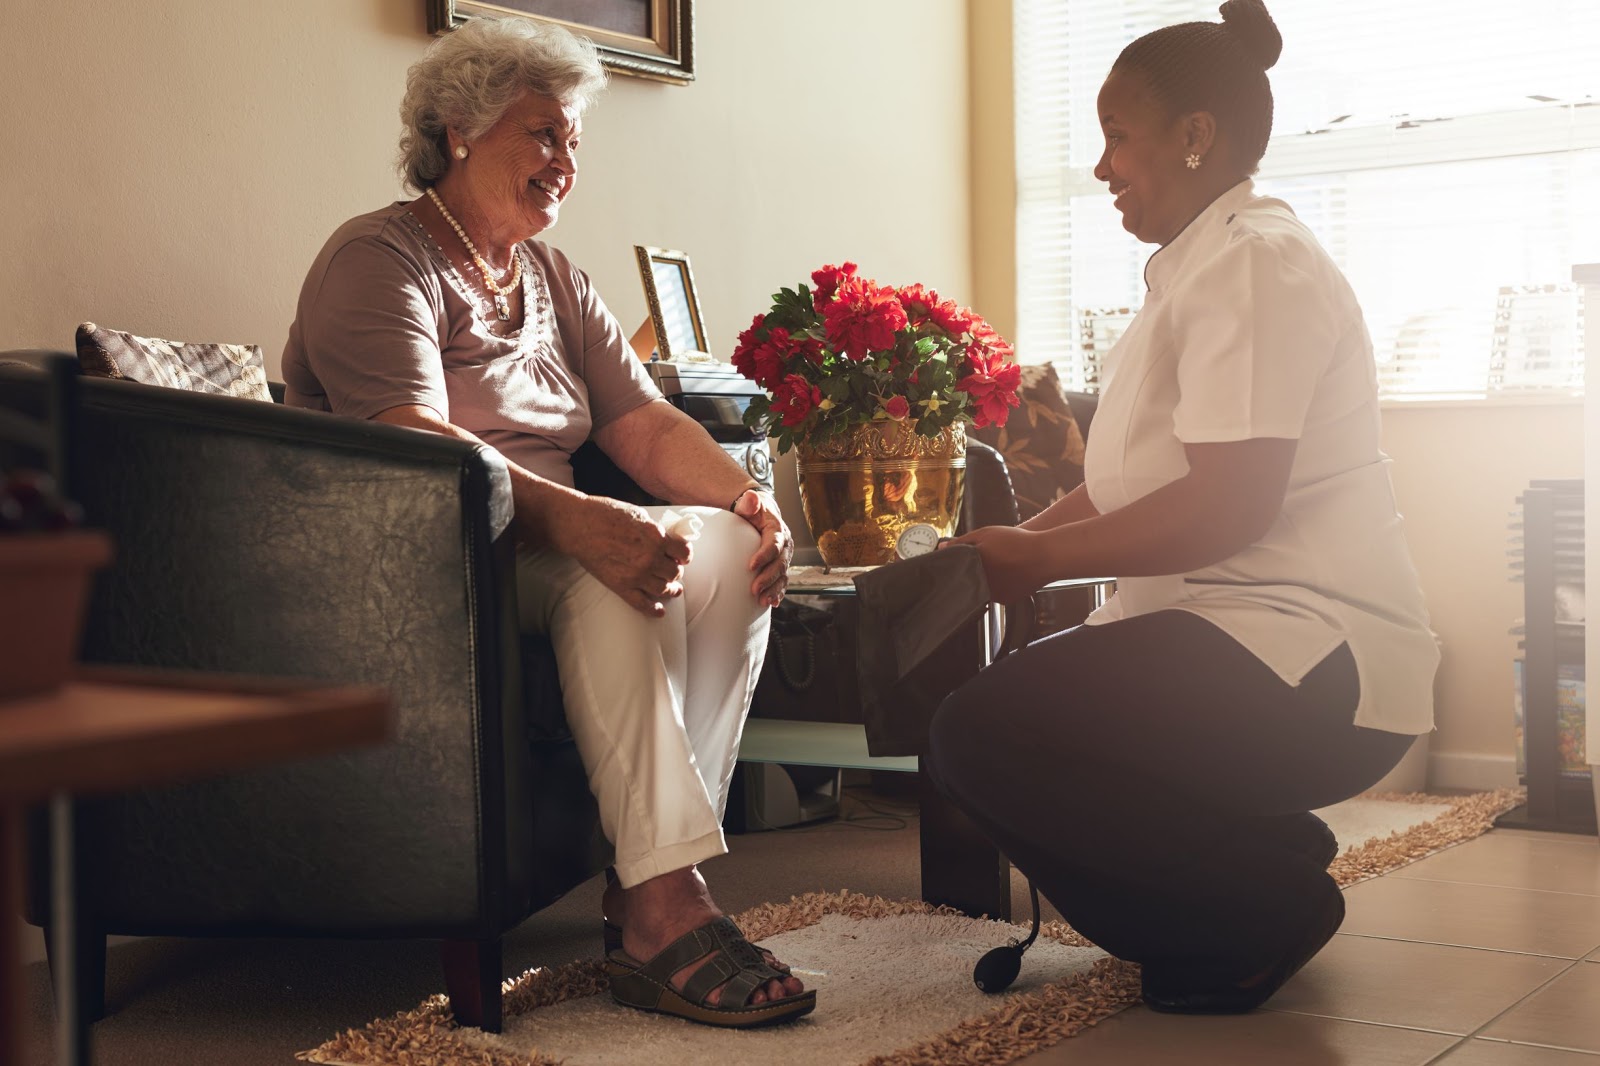 A home health care worker assists her elderly client